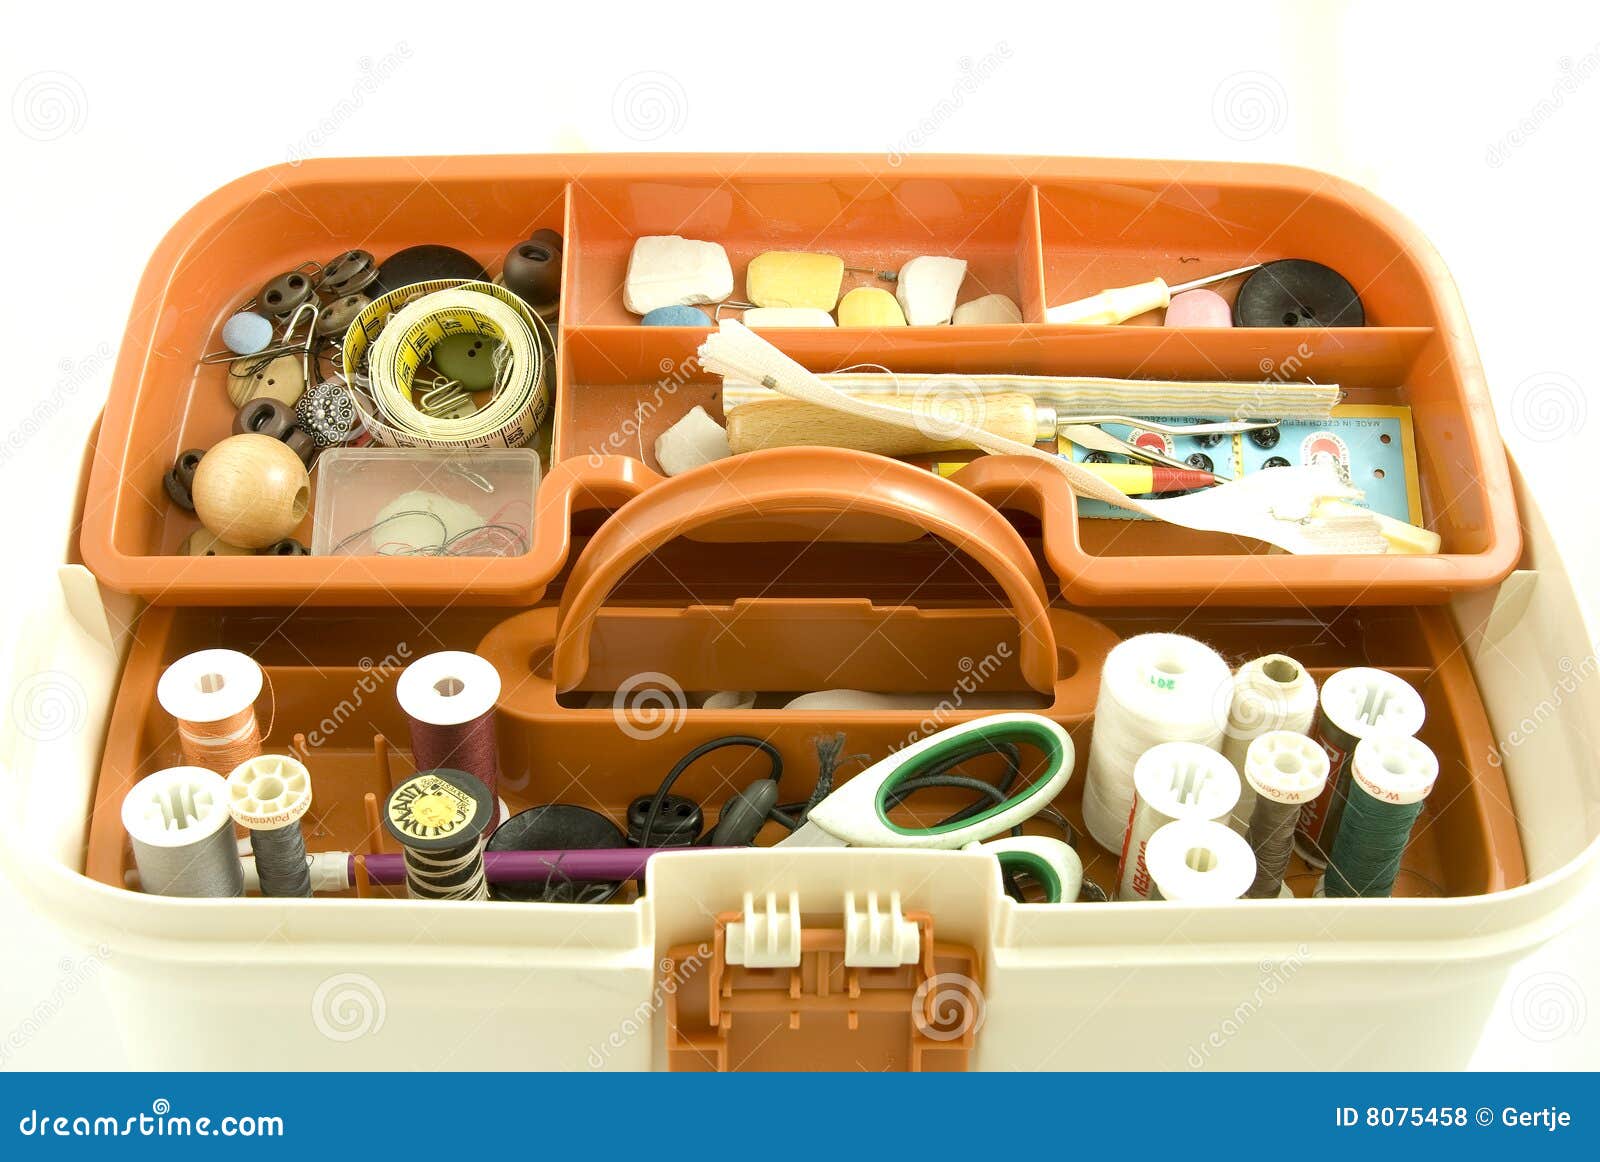 2,170 Sewing Kit Box Images, Stock Photos, 3D objects, & Vectors